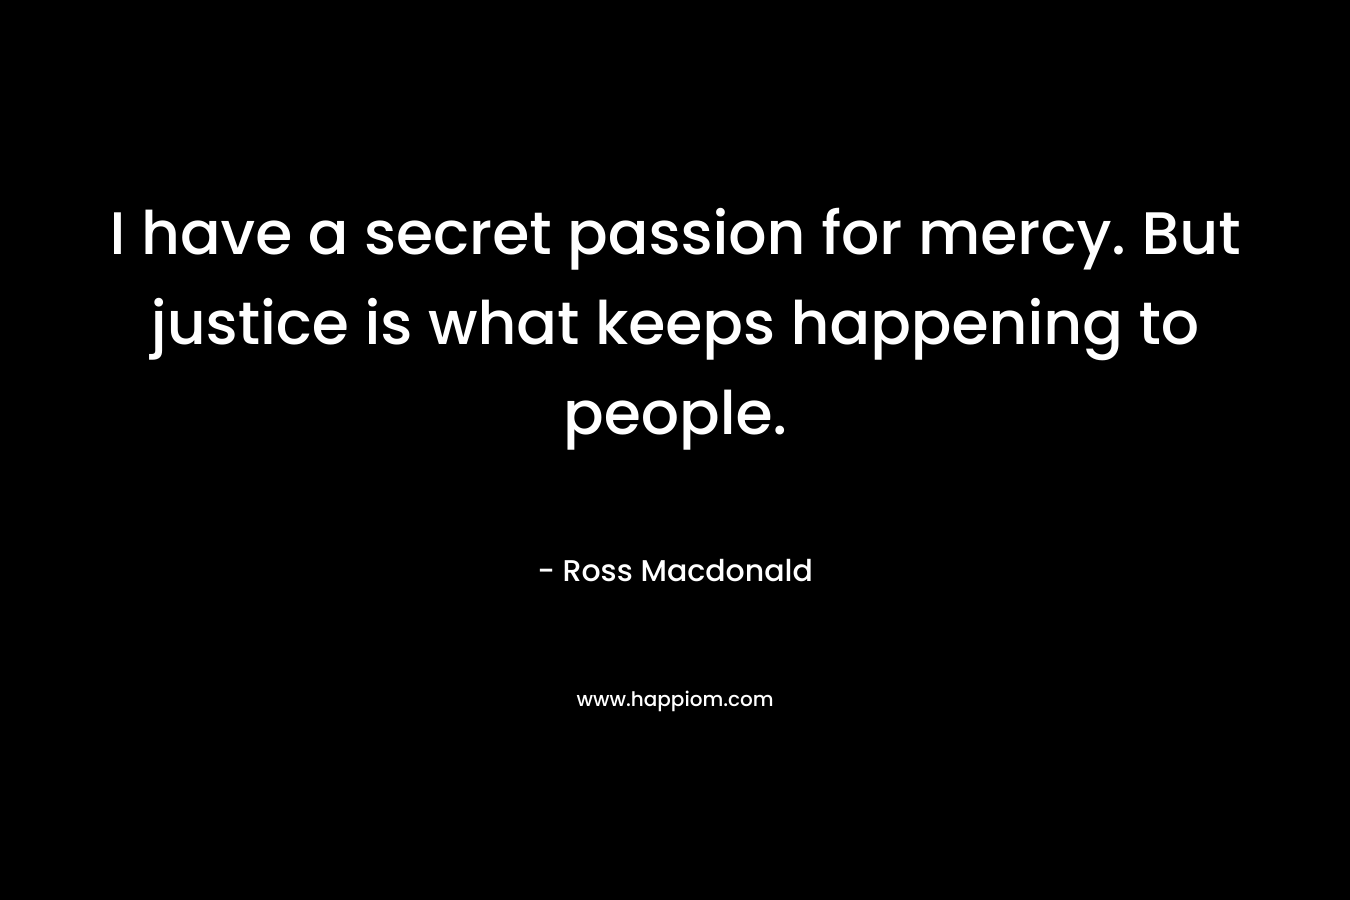 I have a secret passion for mercy. But justice is what keeps happening to people.